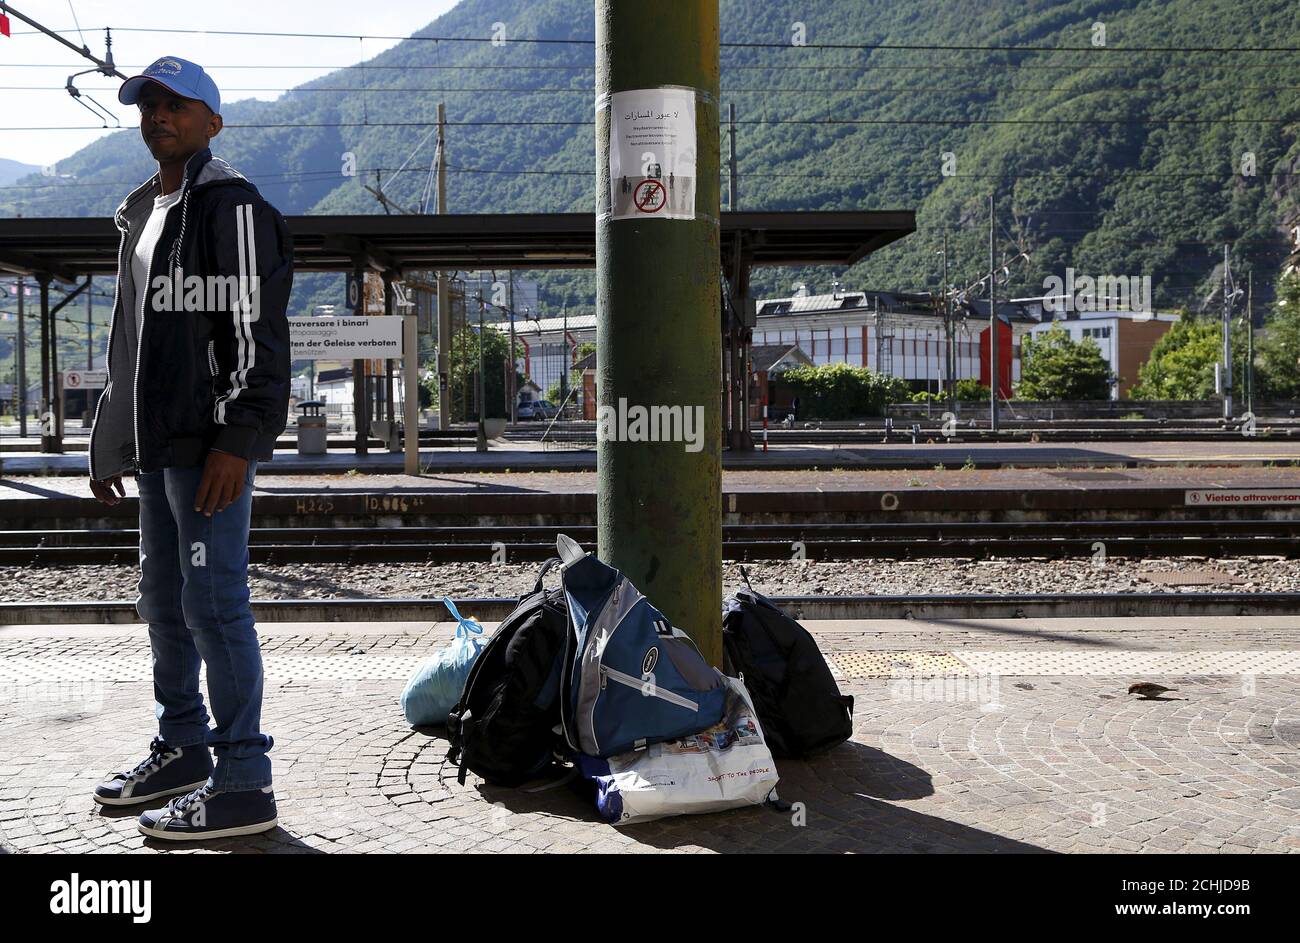 A migrant waits at the Bolzano railway station, northern Italy, May 28, 2015. EU asylum rules, known as the Dublin Regulation, were first drafted in the early 1990s and require people seeking refuge to do so in the European country where they first set foot. Northern European countries defend the policy as a way to prevent multiple applications across the continent. Some are upset with what they see as Italy's lax attitude to registering asylum seekers. Earlier this year, French police stopped about 1,000 migrants near the border and returned them to Italy. Smaller round-ups happen daily in Au Stock Photo